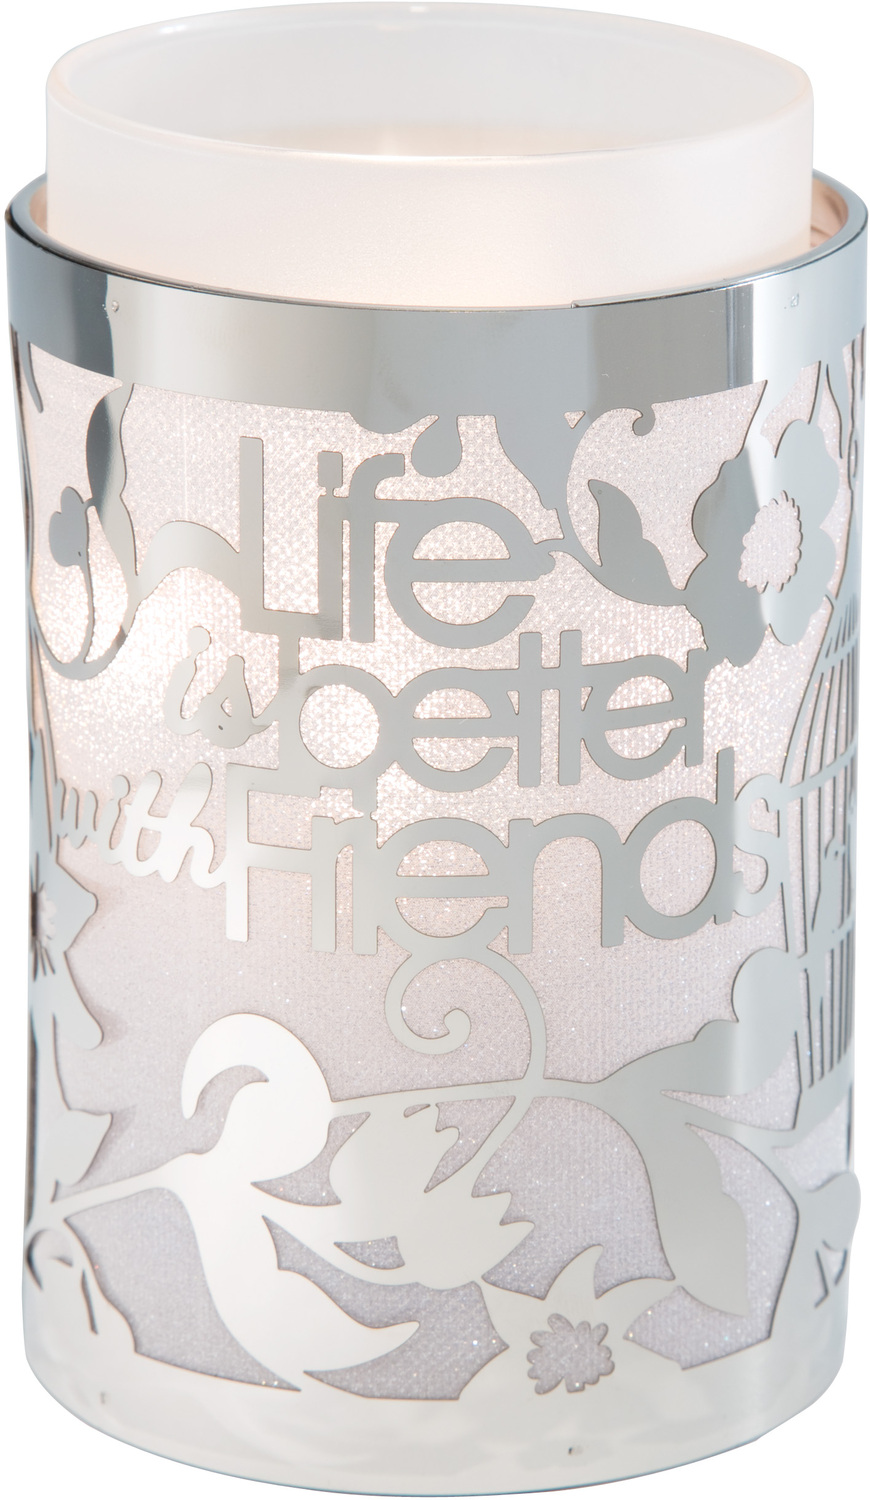 Life is Better with Friends by Simply Shining - Life is Better with Friends - 3.5" x 5.5" Pierced Hurricane